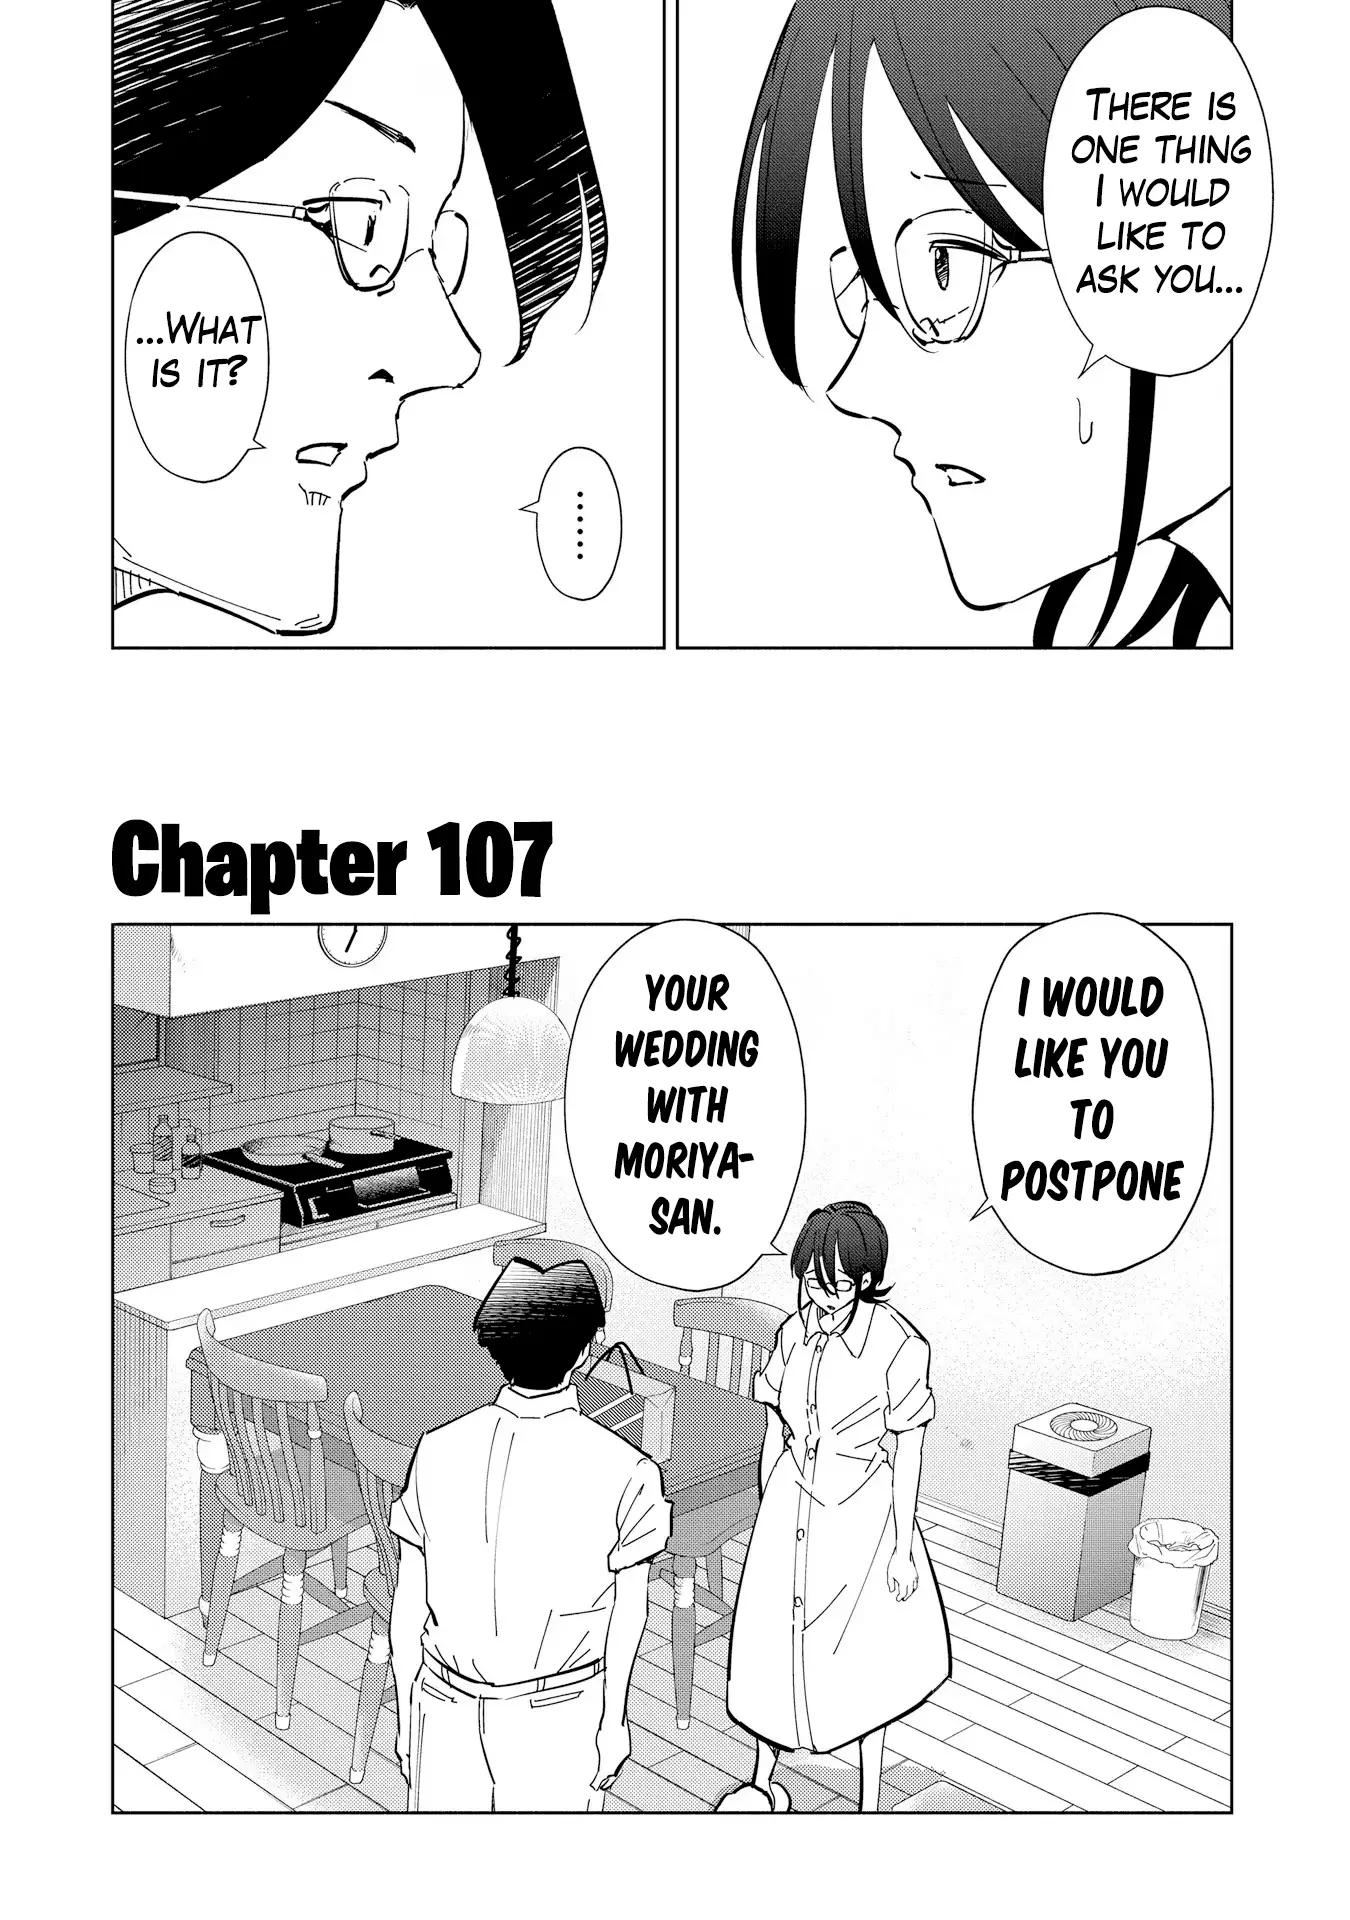 If My Wife Became An Elementary School Student - 107 page 2-6721201c